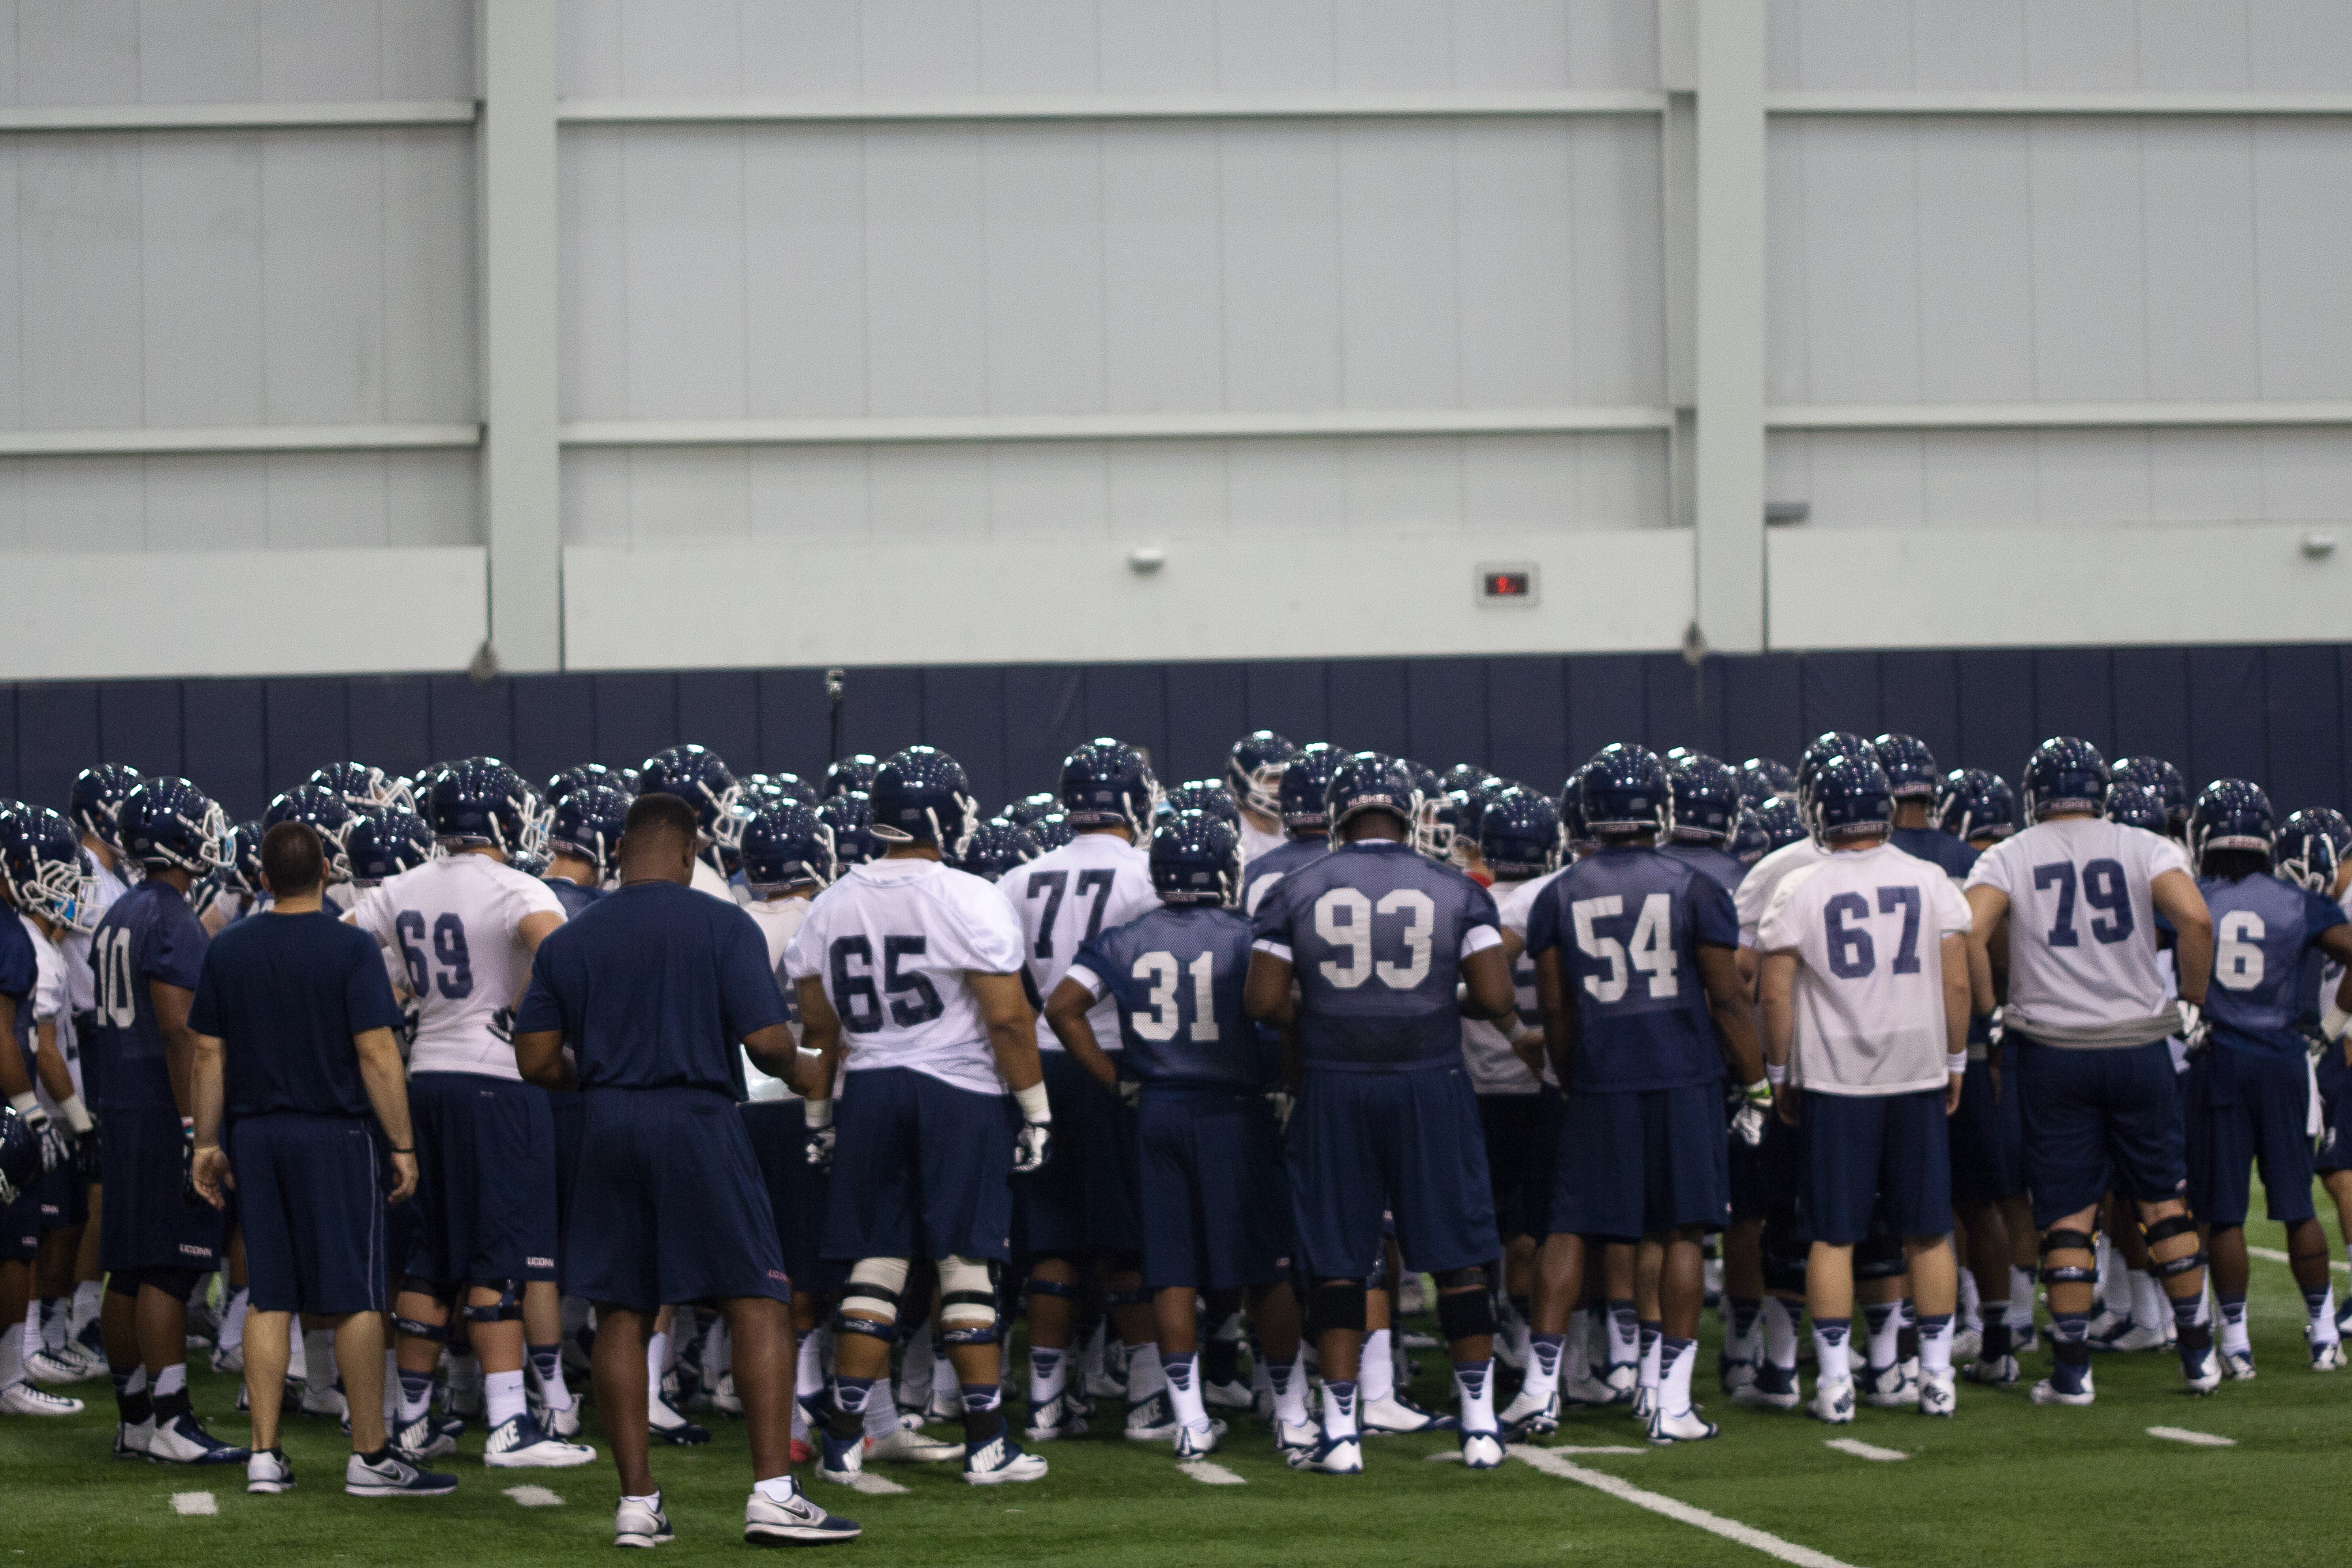 The UConn Football team gathers around head coach Bob Diaco before breaking into drills at the first practice of the 2014 season.